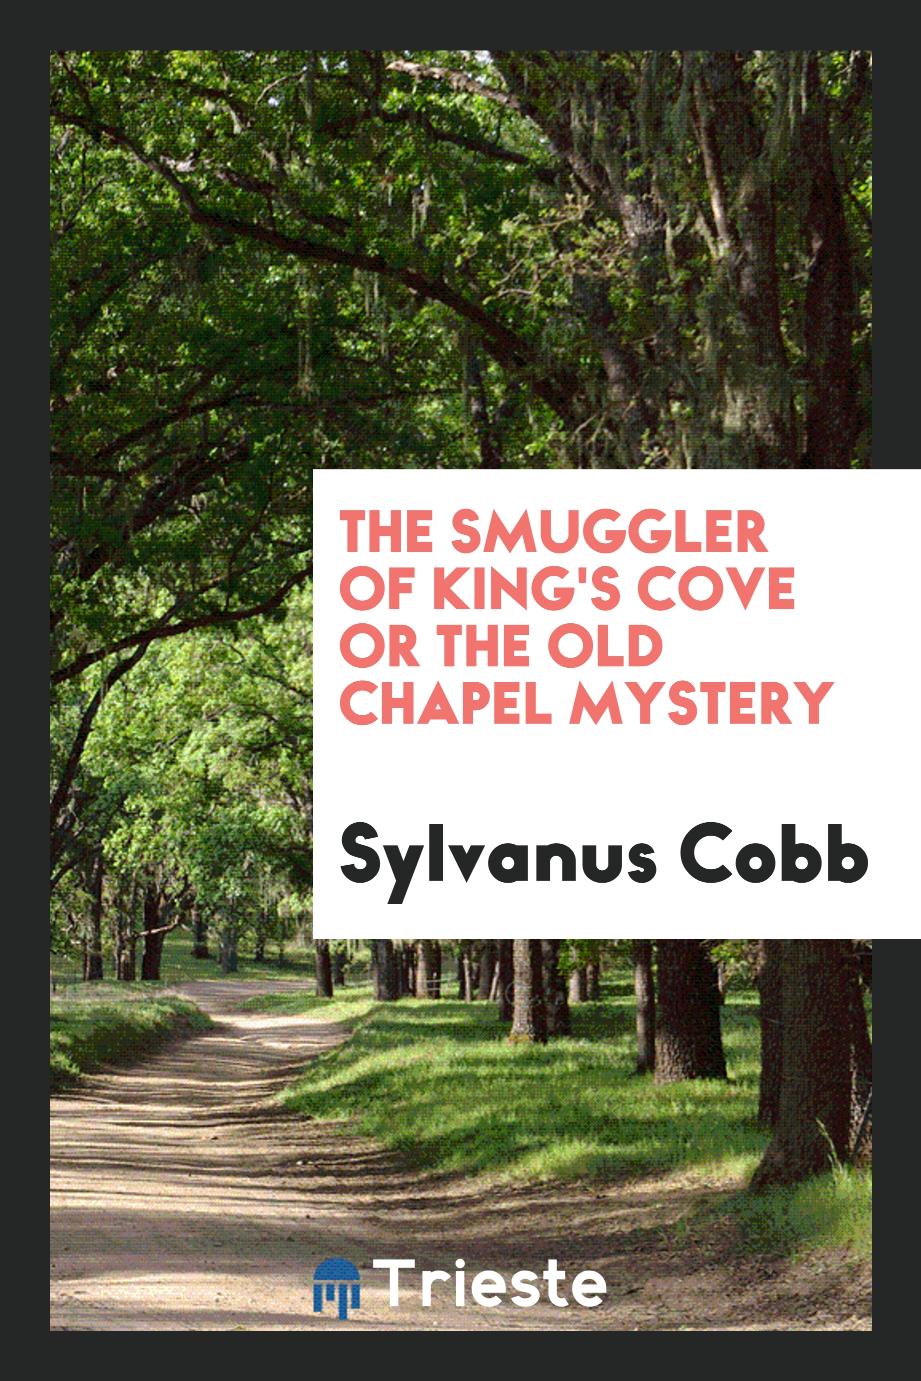 The smuggler of King's cove or The old chapel mystery